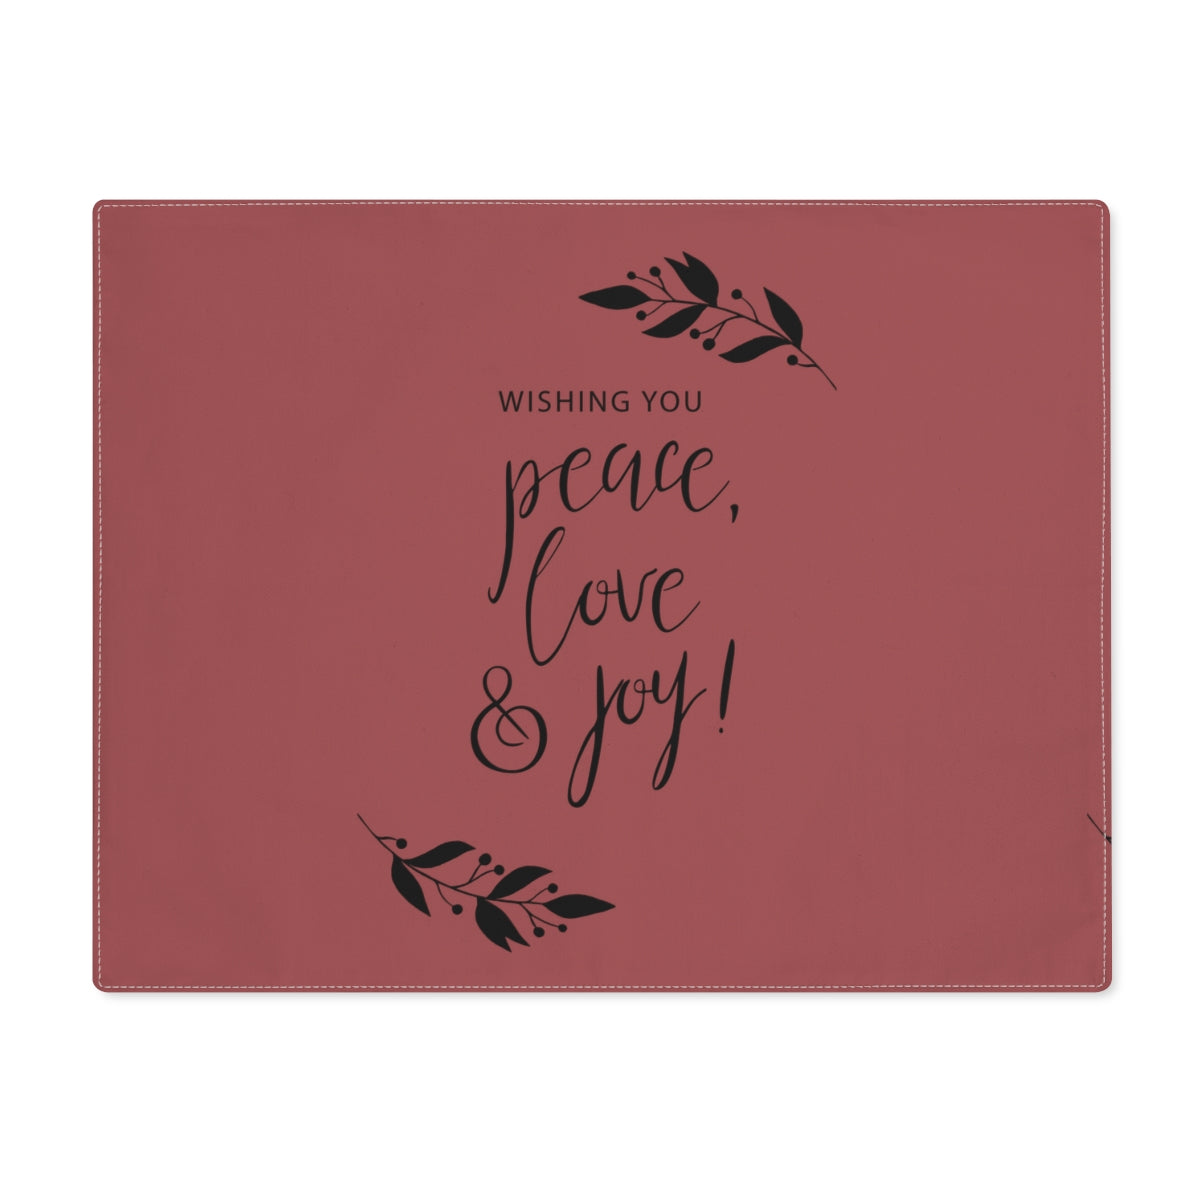 Holiday Table Placemat - Peace, Love & Joy